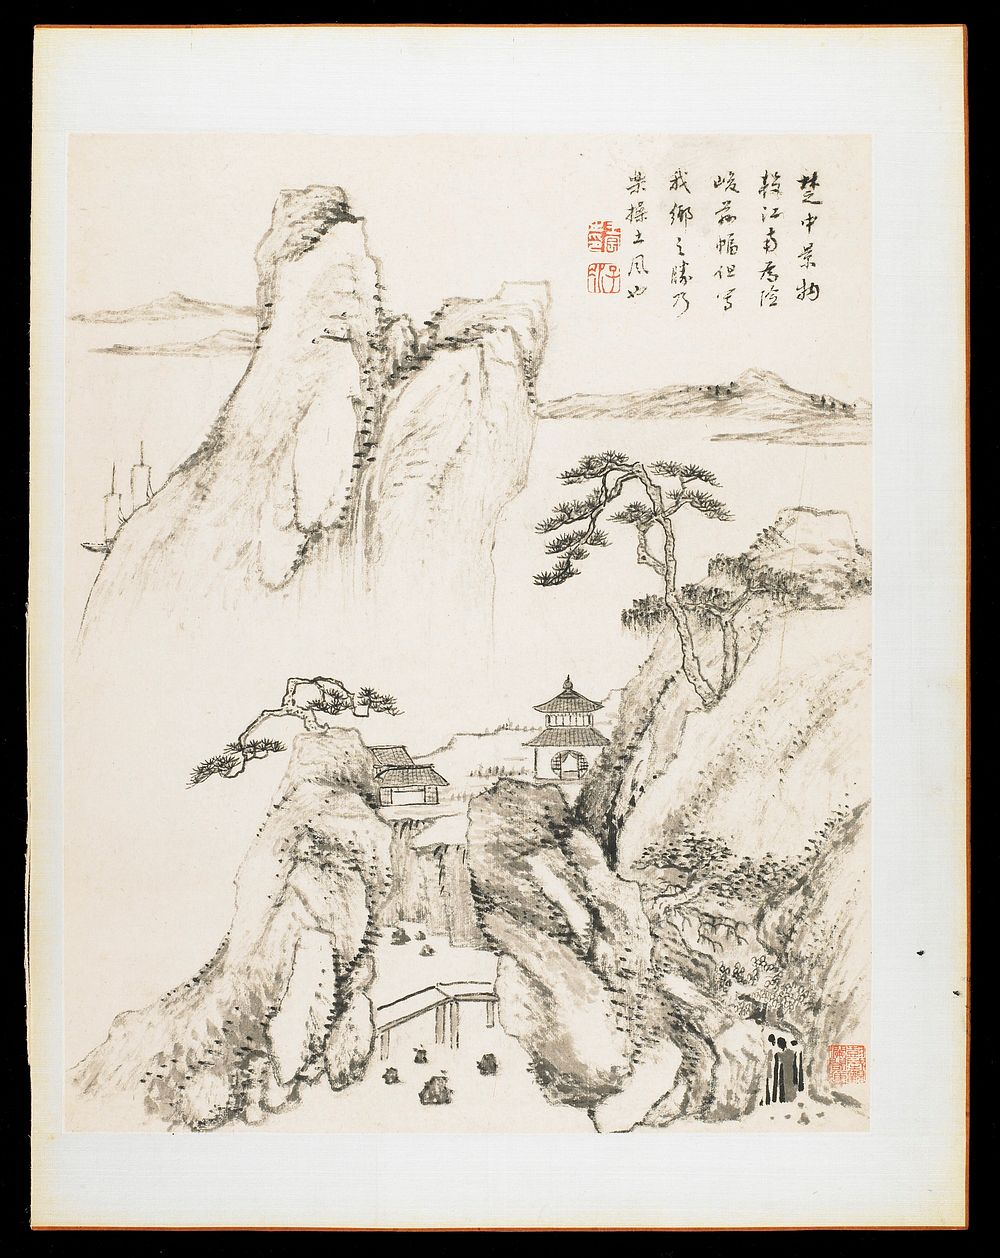 2 buildings at center in a rocky landscape with trees; 2 sailboats partially hidden by rocks at L; from an album of 12…